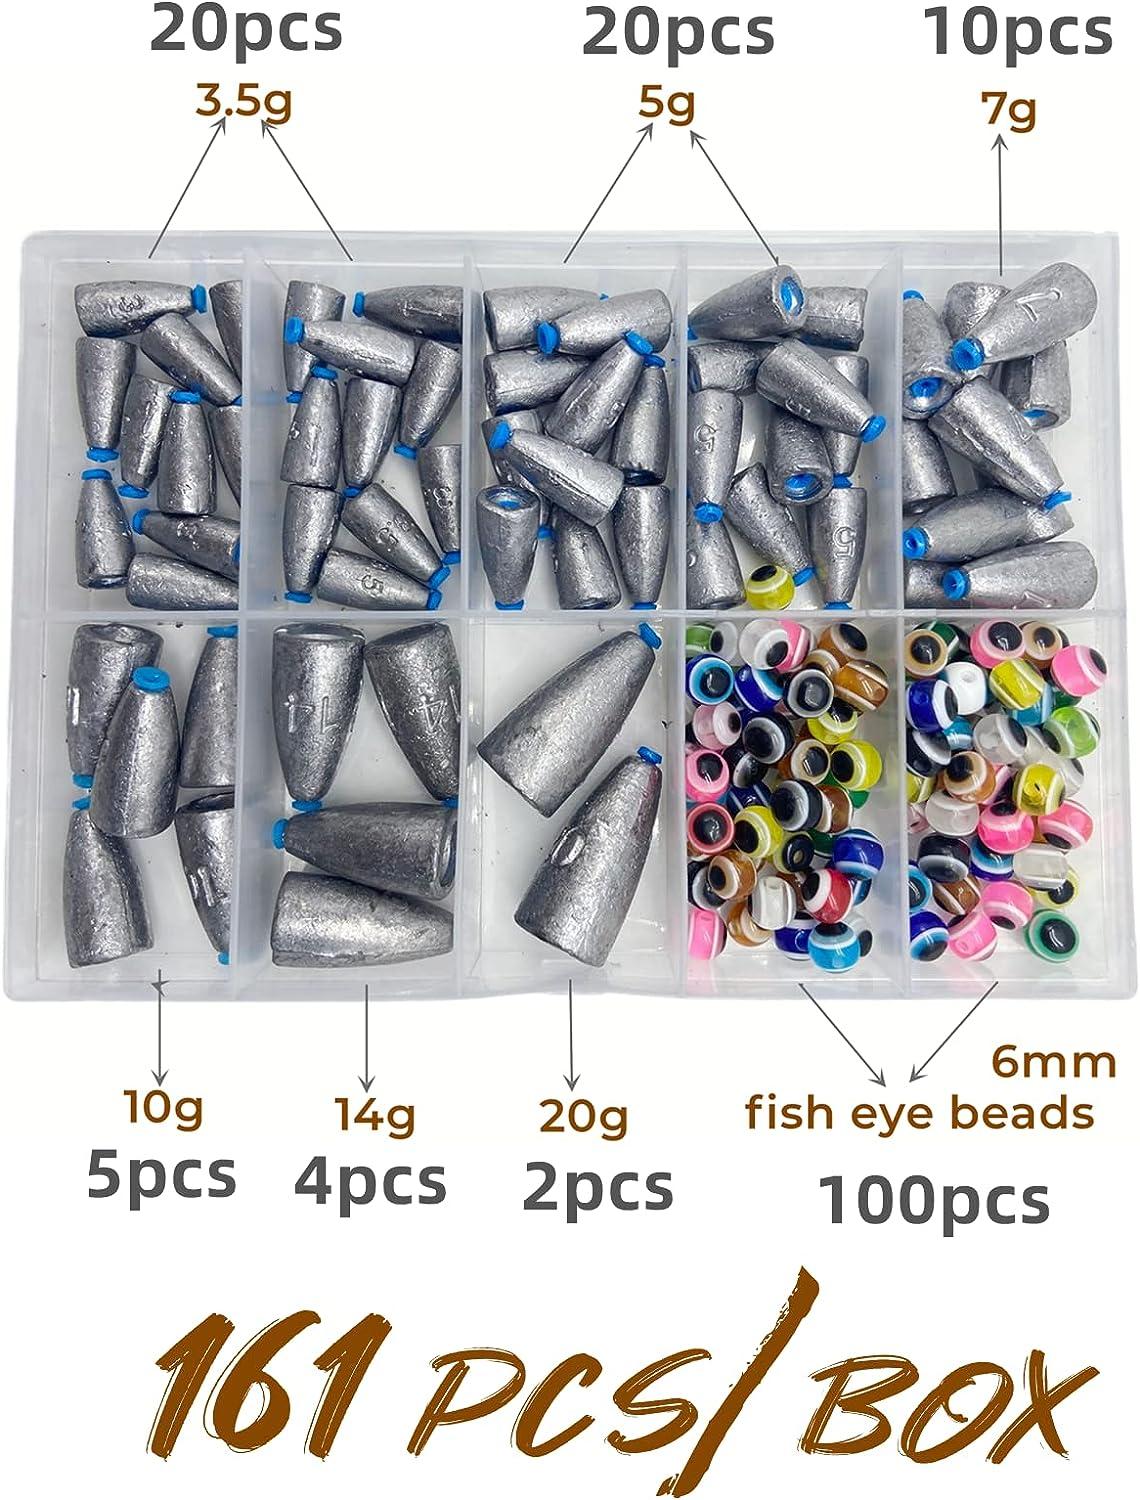 DAMIDEL 161Pcs/Box Worm Fishing Sinker Weights Kit with Soft Plastic  Core(20g,14g,10g,7g,5g,3.5g Mixed, 61Pcs Bullet Lead Fishing Weights , 100  Pcs Eye Beads Bait , Don't Hurt Line Texas Rig